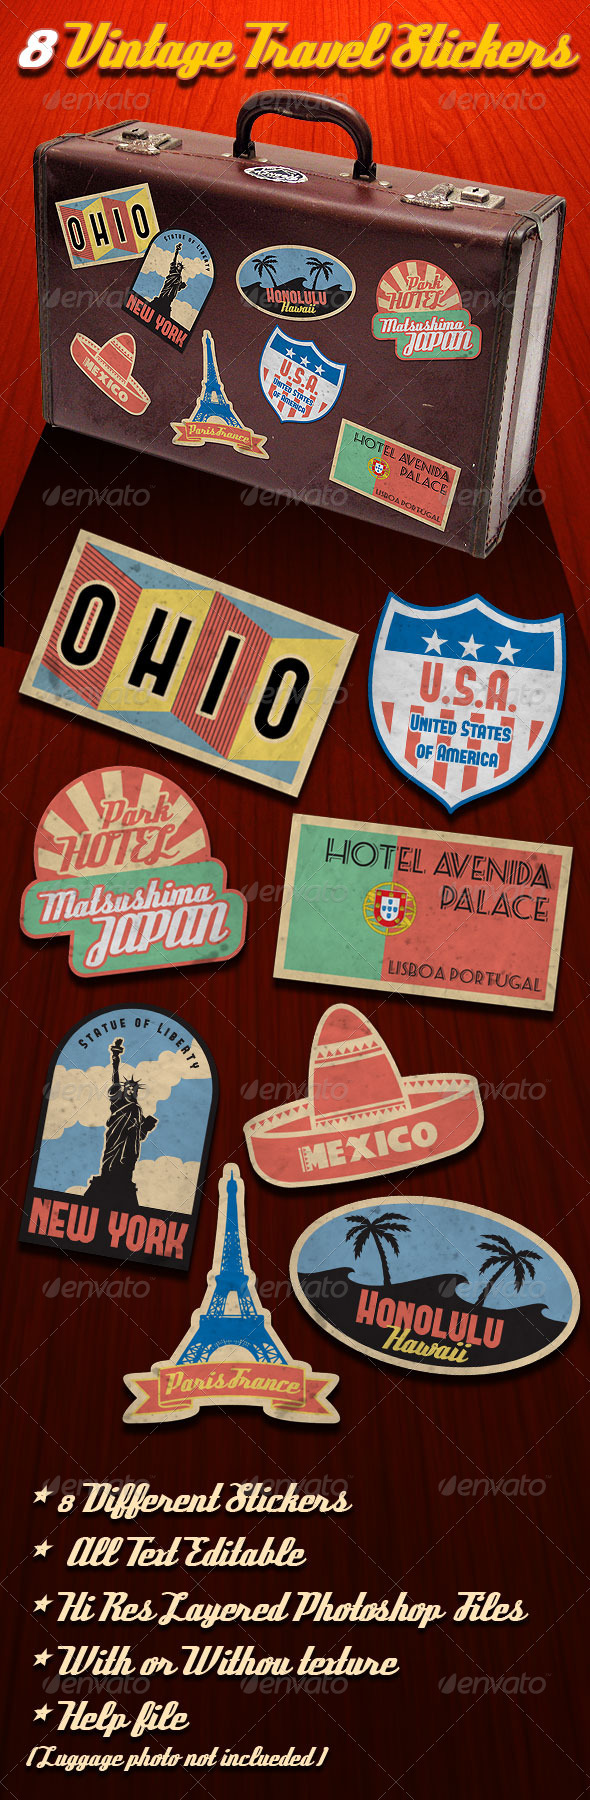 Vintage Travel Stickers by PVillage | GraphicRiver